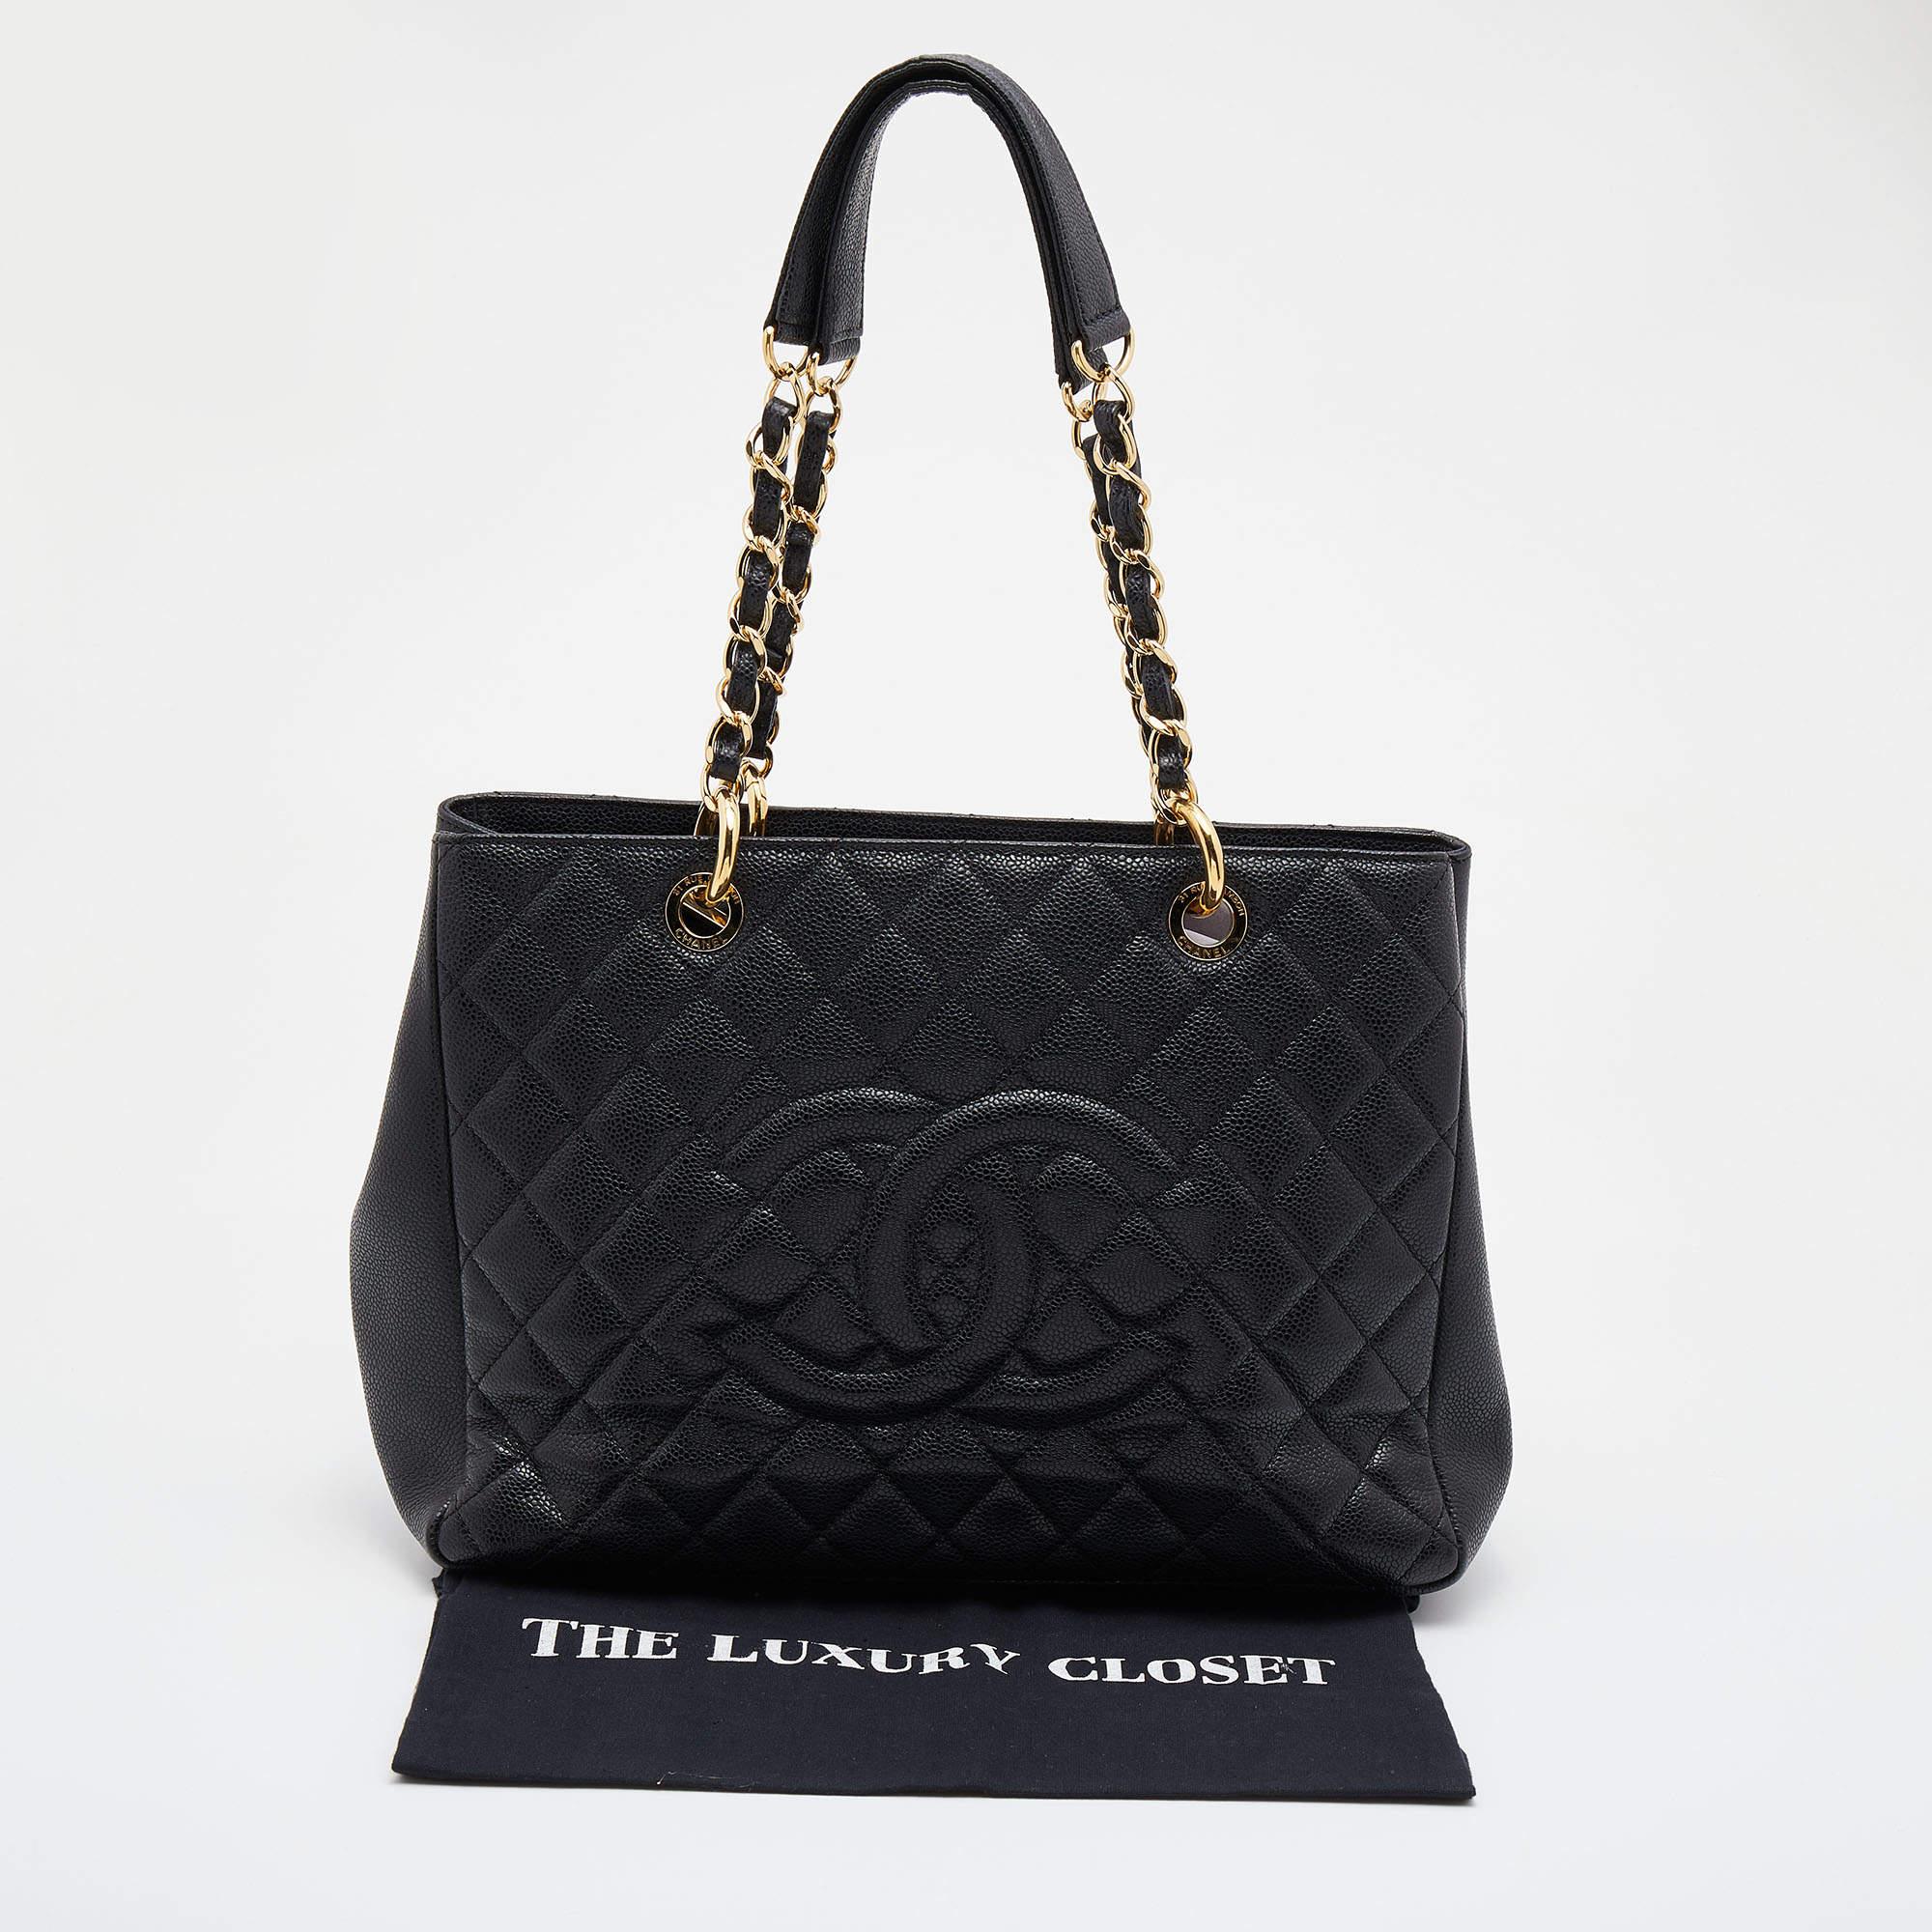 Chanel Black Quilted Caviar Leather GST Shopper Tote 13